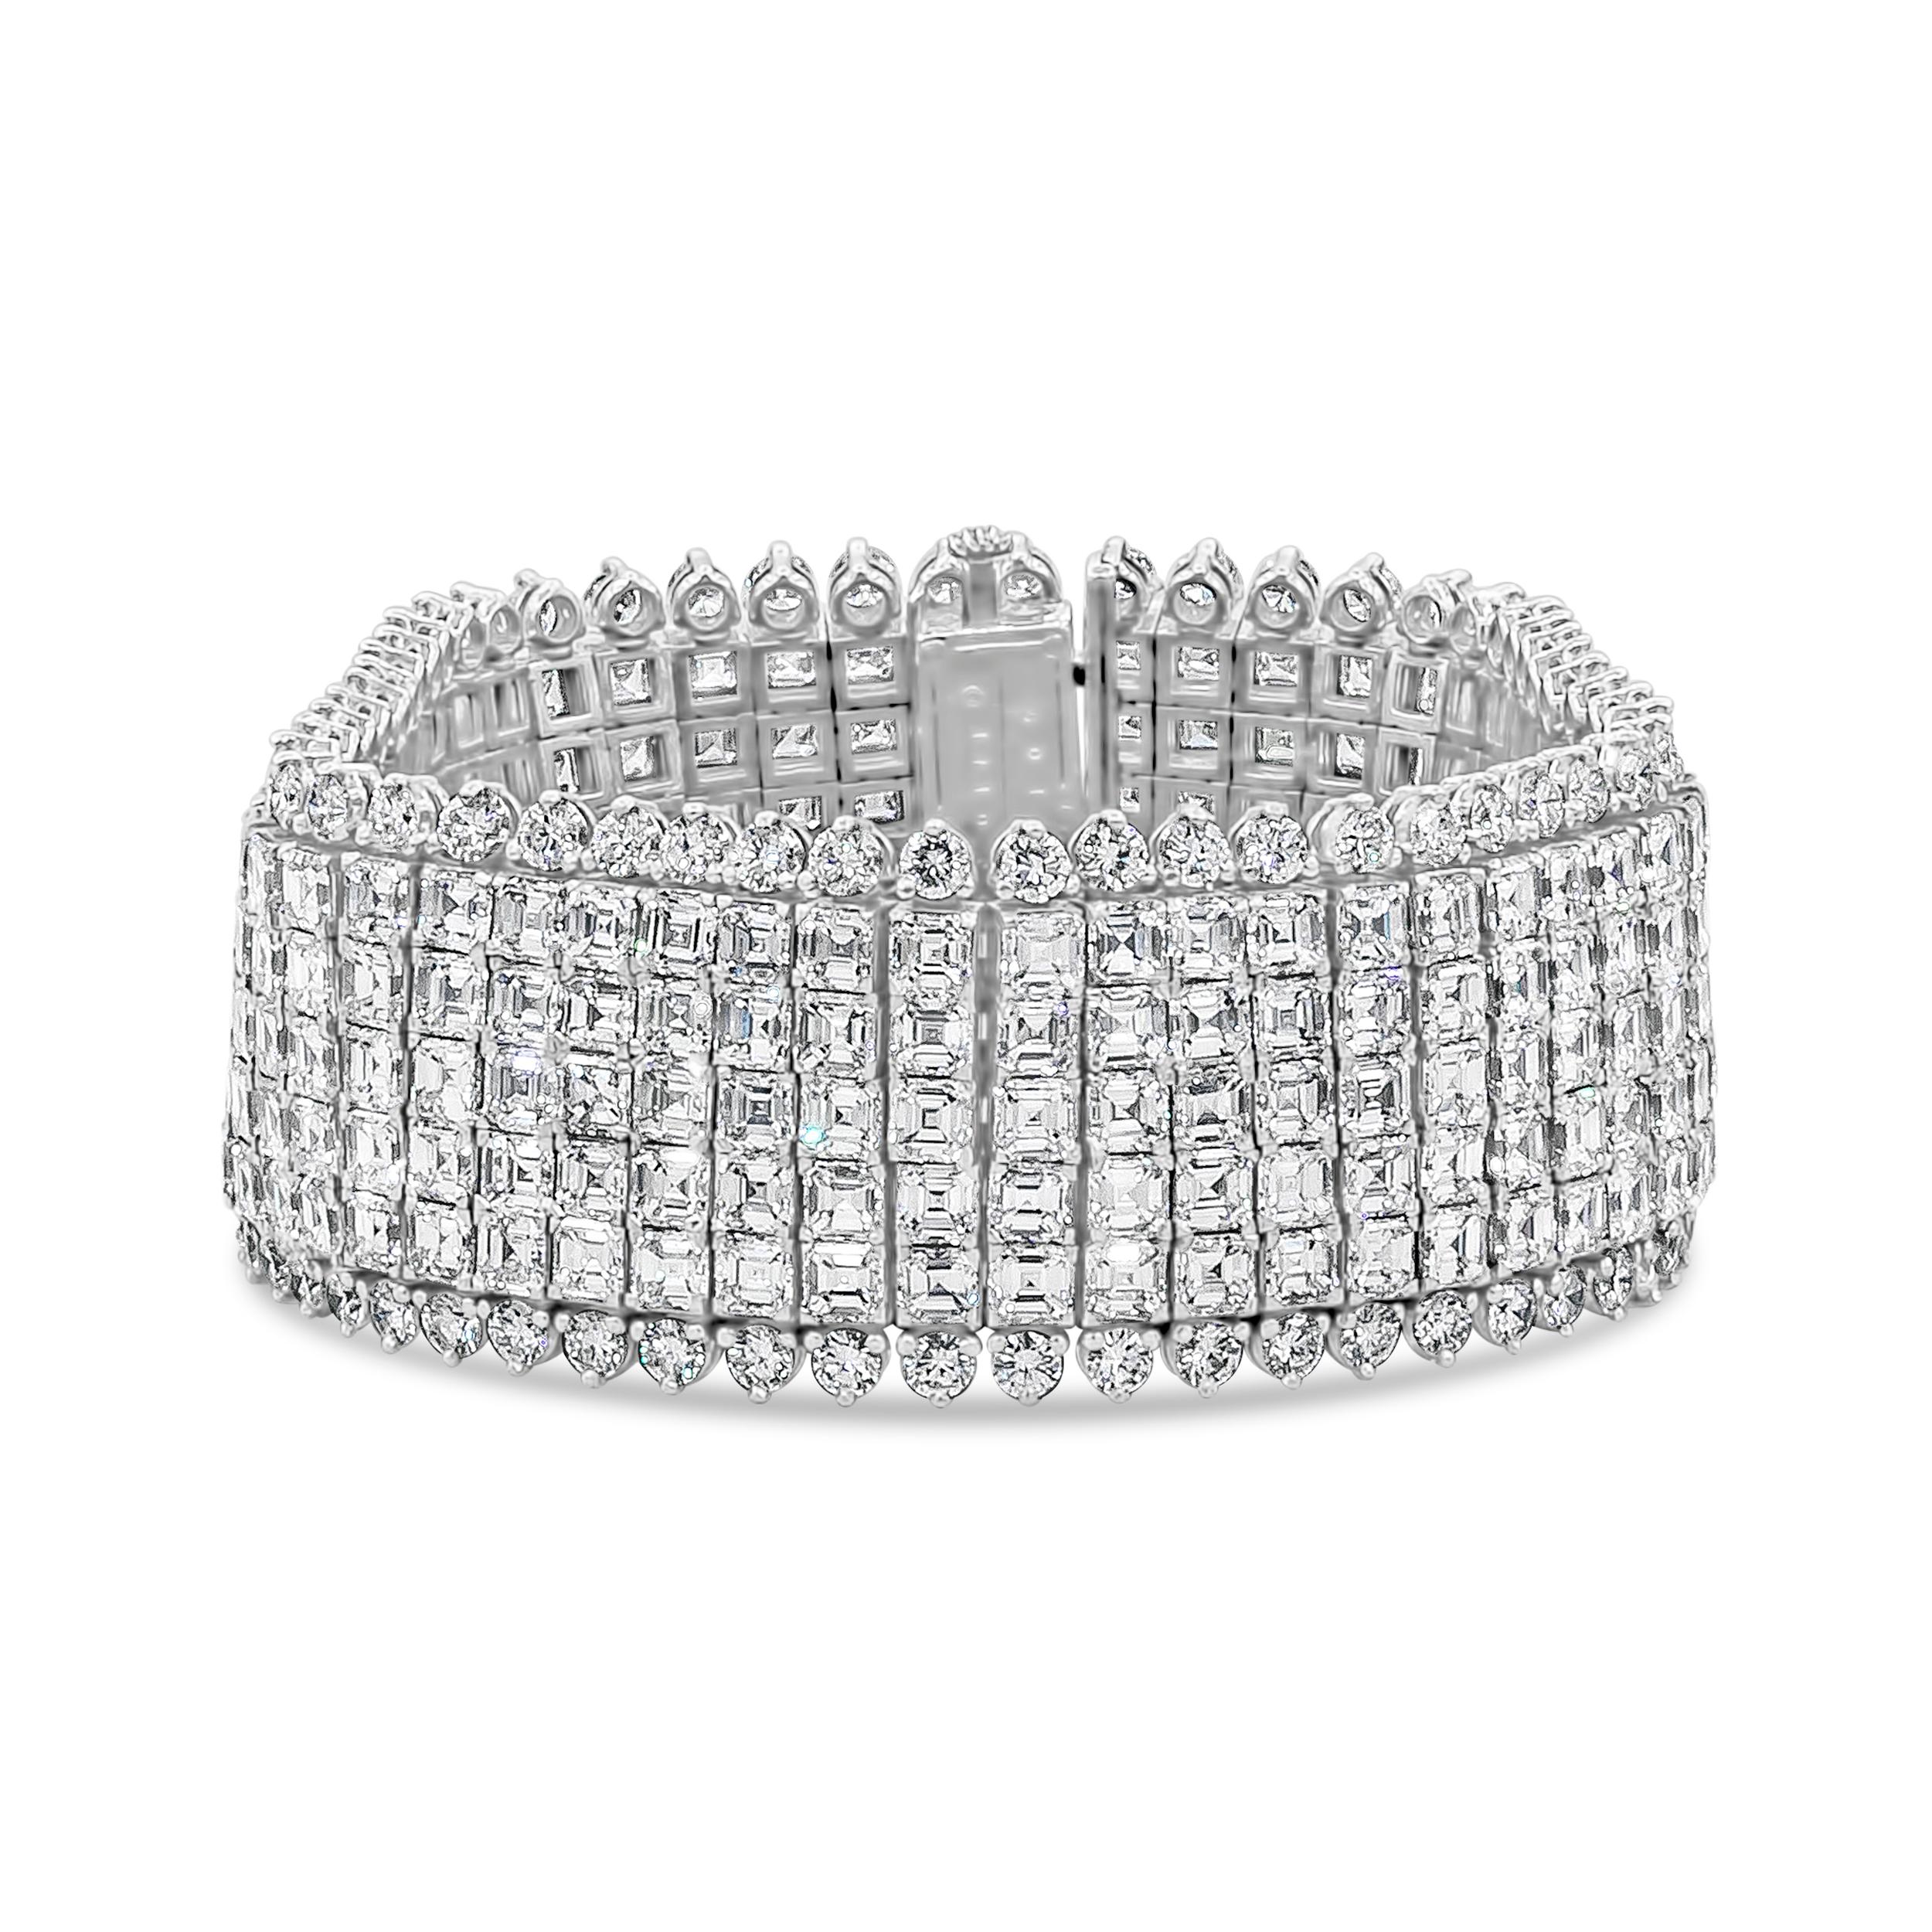 Finely crafted bracelet by Oscar Heyman showcasing five rows of 265 pieces of Asscher cut diamonds weighing 45.25 carats total, F color and VS in clarity.  Accented by row of 106 round brilliant diamonds on either side of the bracelet weighing 6.63